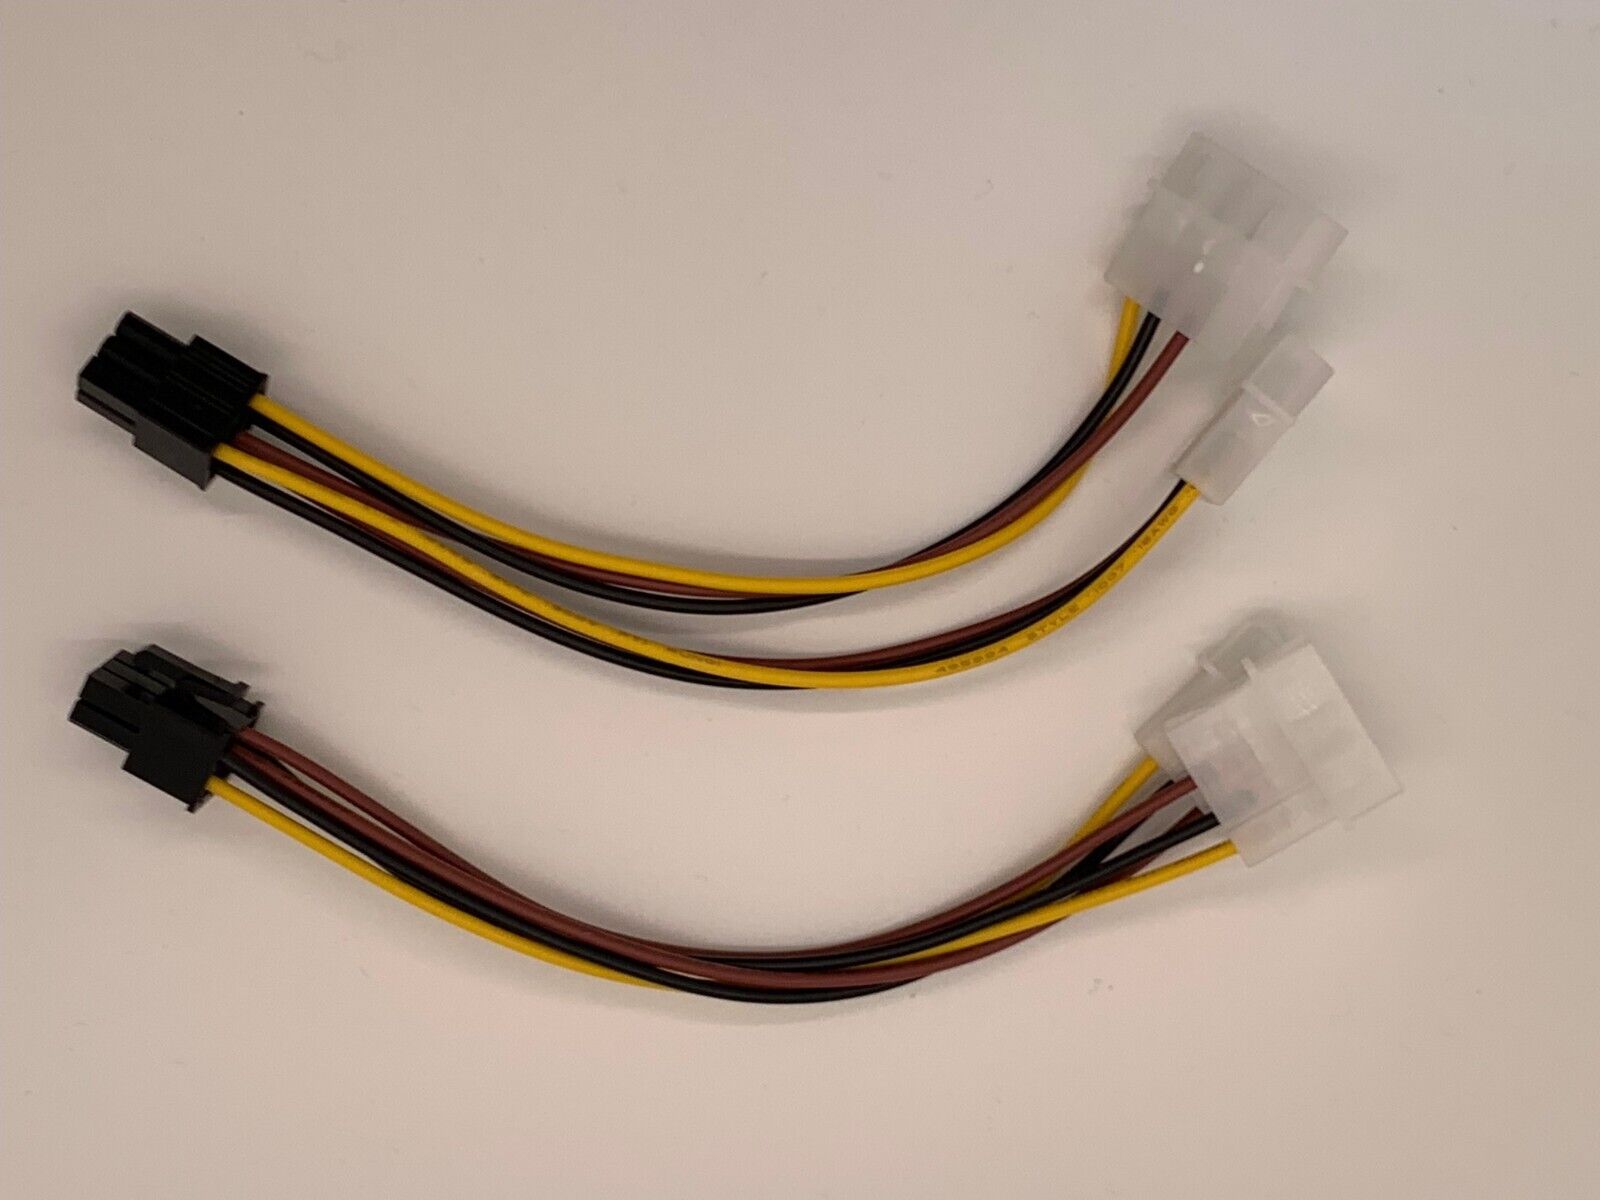 lot of 2x 6 pin pcie (male) to 2x 4 pin molex (male) 6 inch power cable adapter